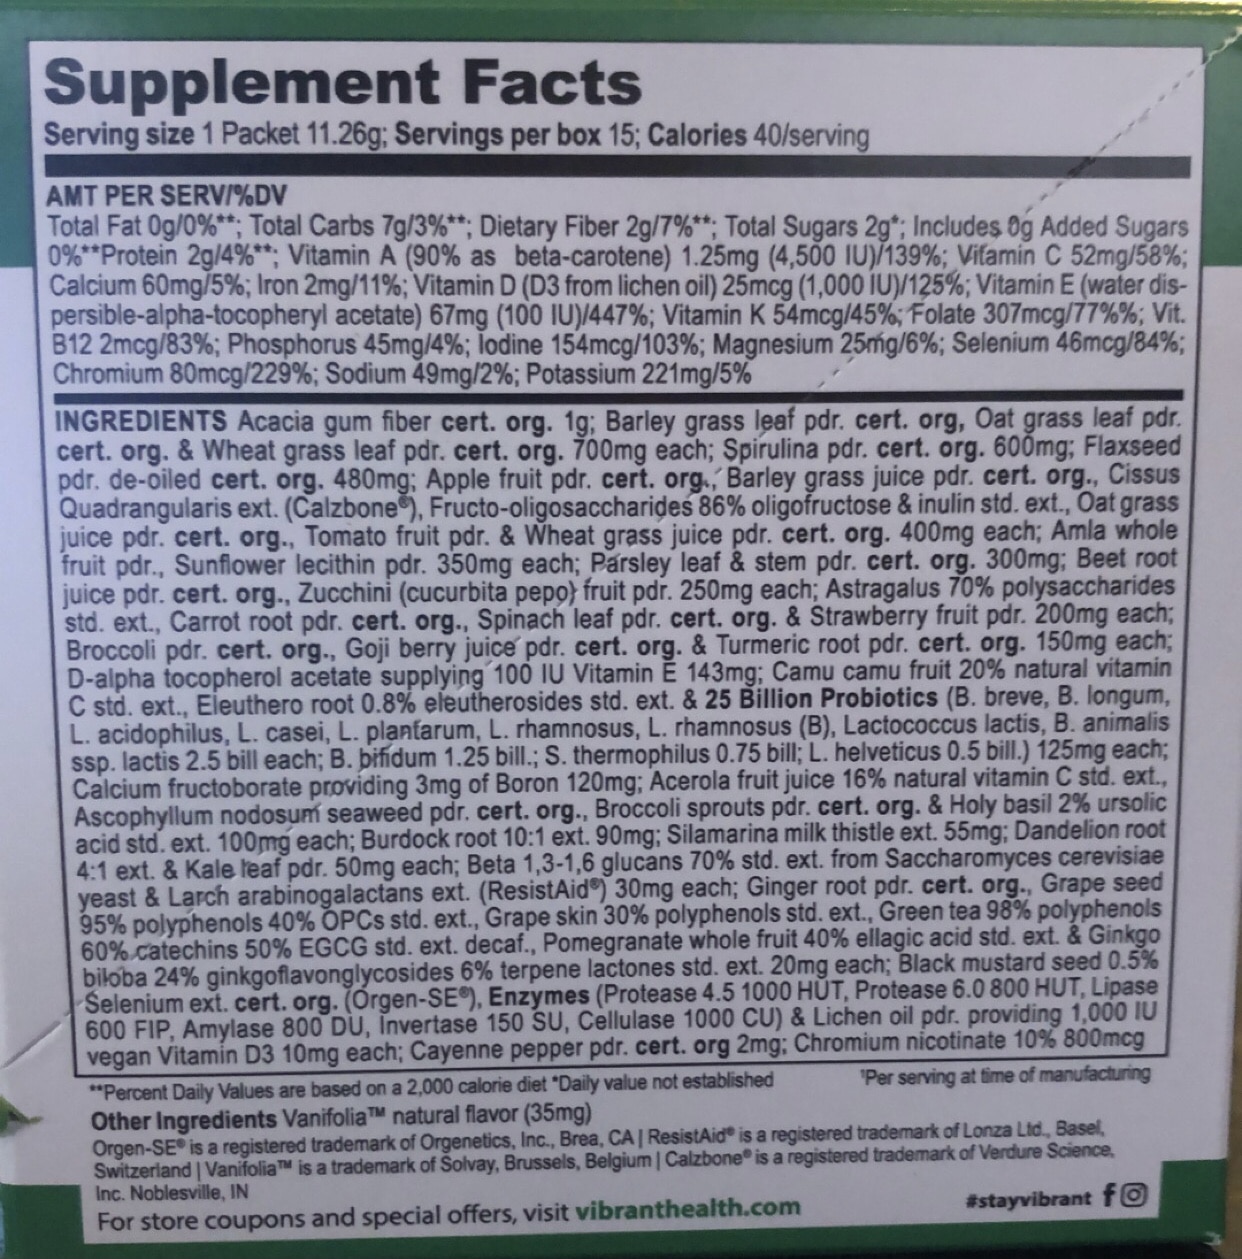 Green vibrance ingredients list and supplement facts